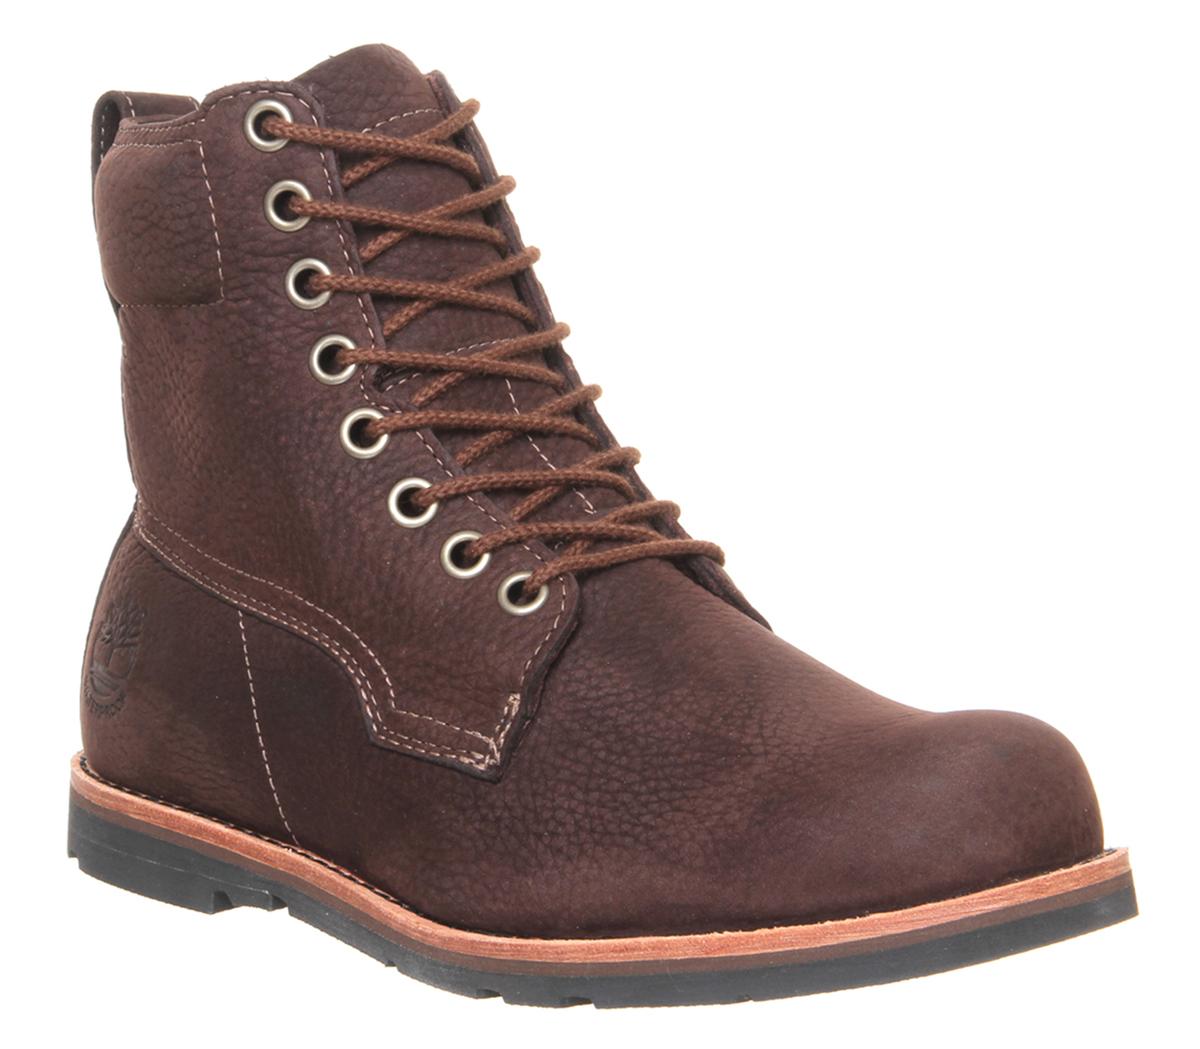 timberland rugged 6in boot